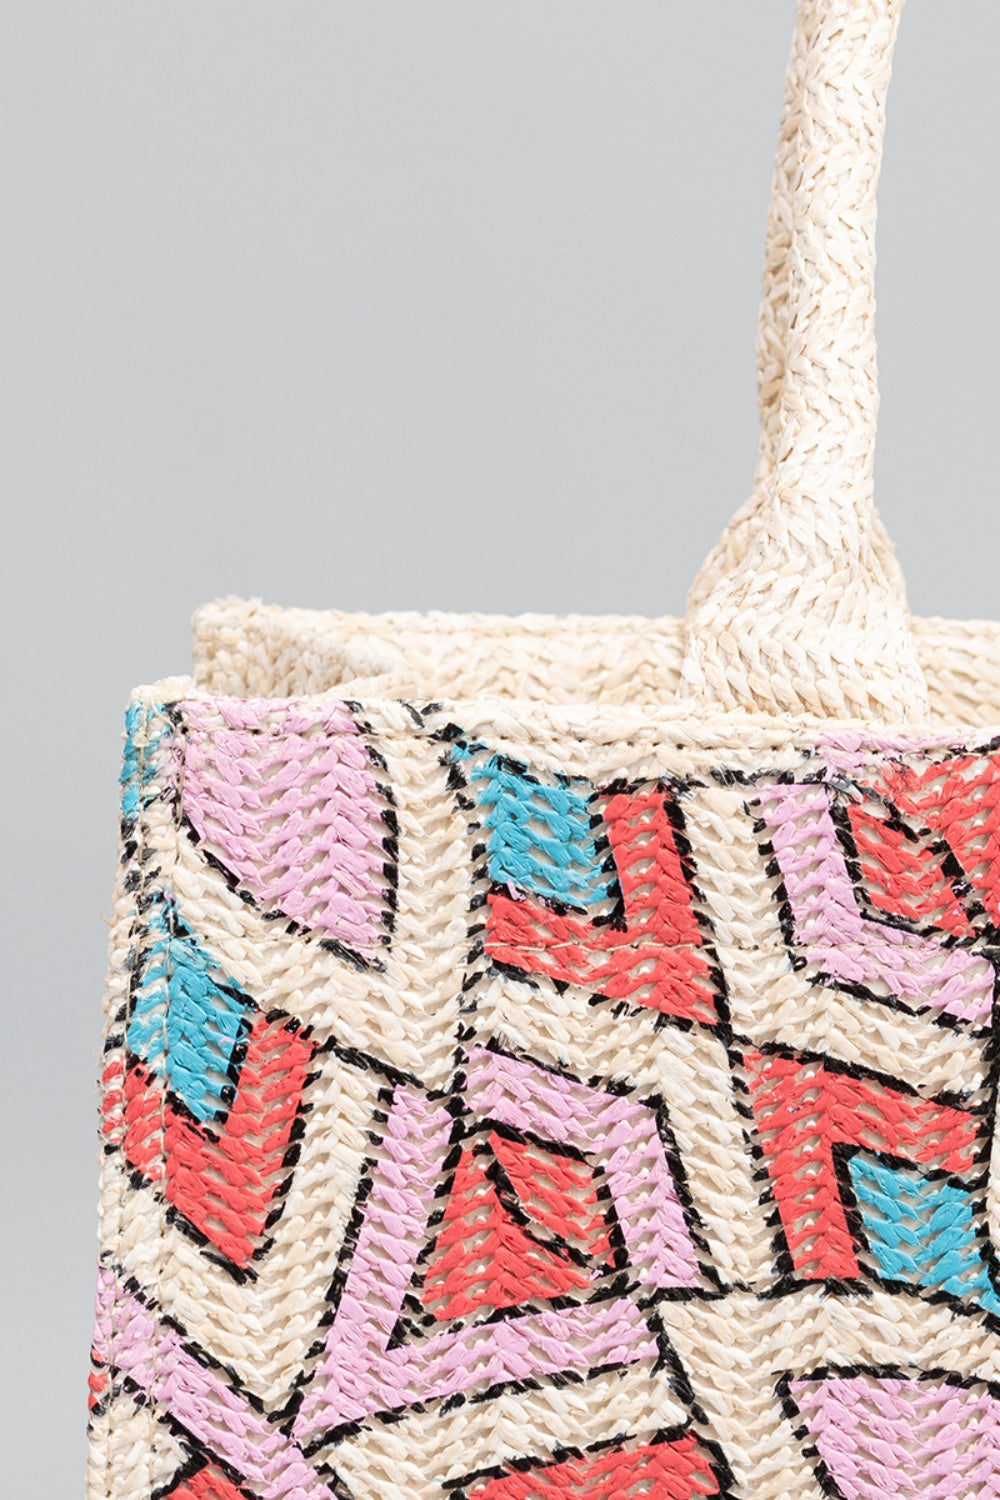 Eco-friendly straw tote bag with sturdy woven straps